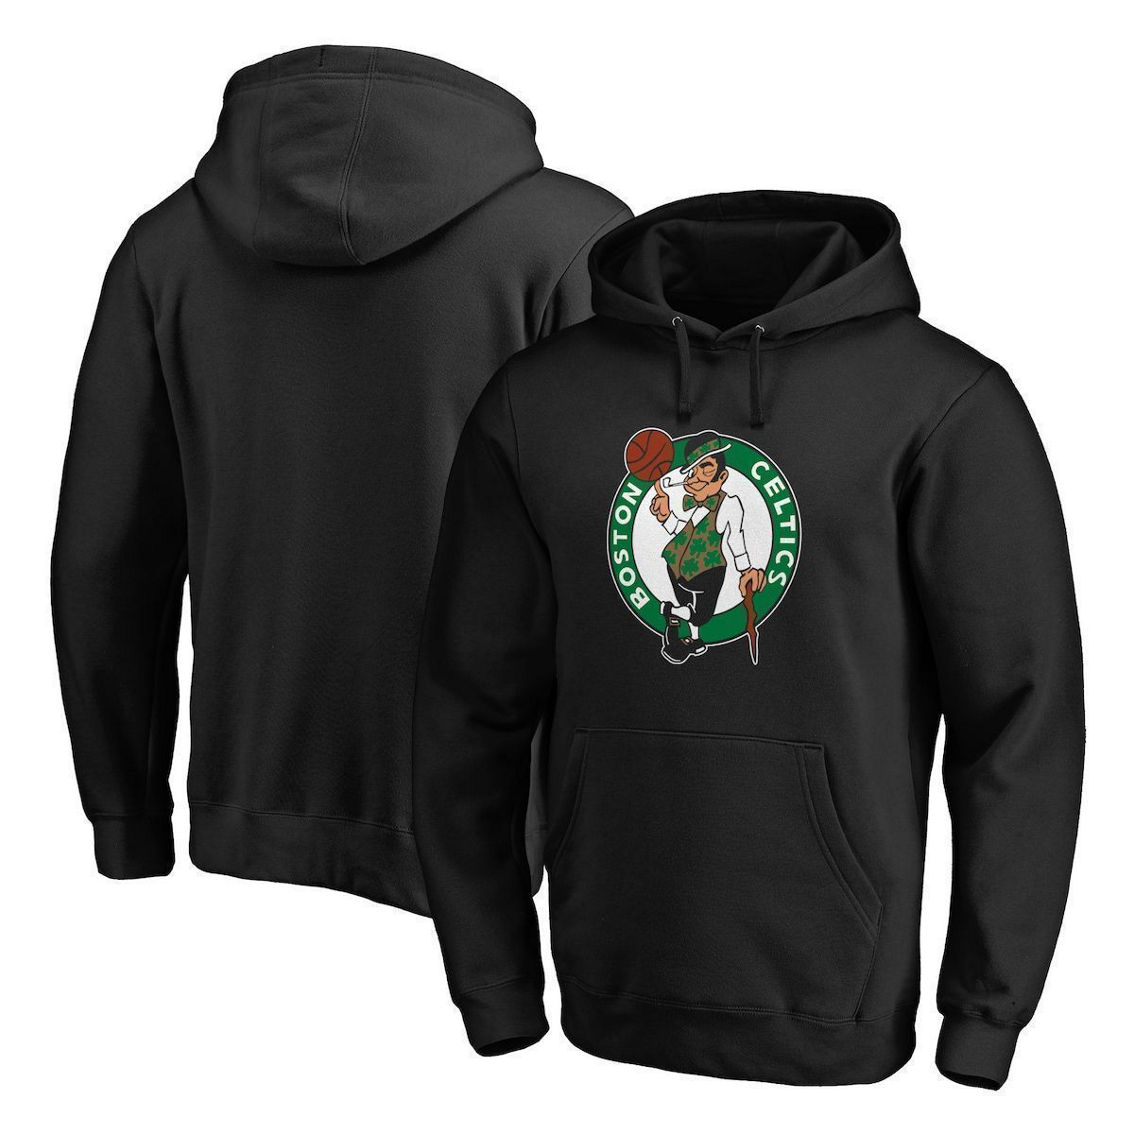 Fanatics Branded Men's Black Boston Celtics Icon Primary Logo Fitted Pullover Hoodie - Image 1 of 4